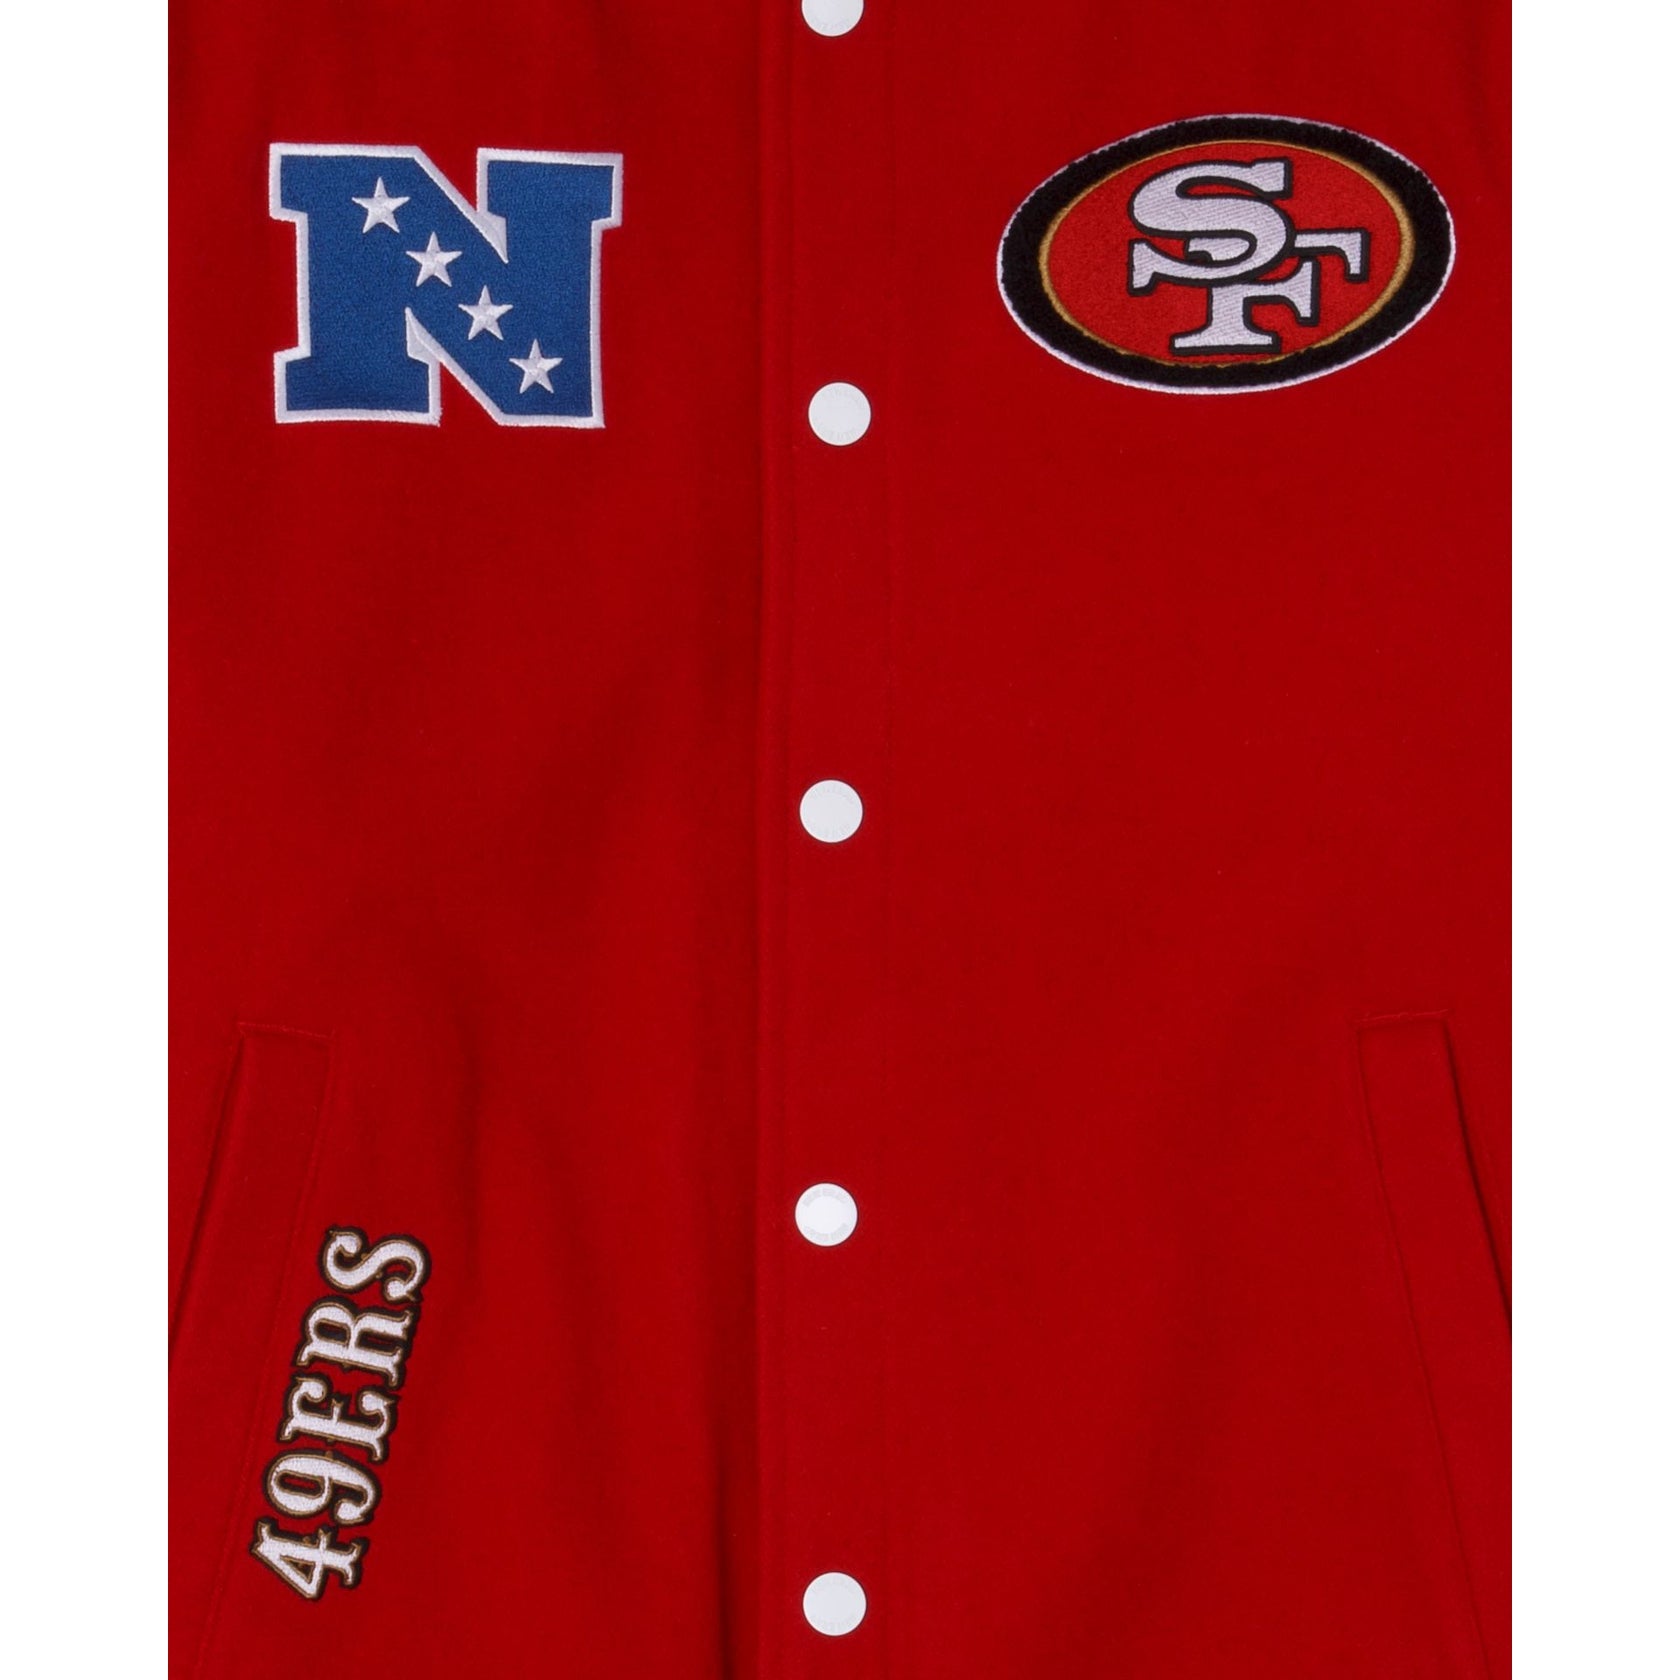 Wool/Leather NFL San Francisco 49ers Red and White Varsity Jacket - Jackets  Expert